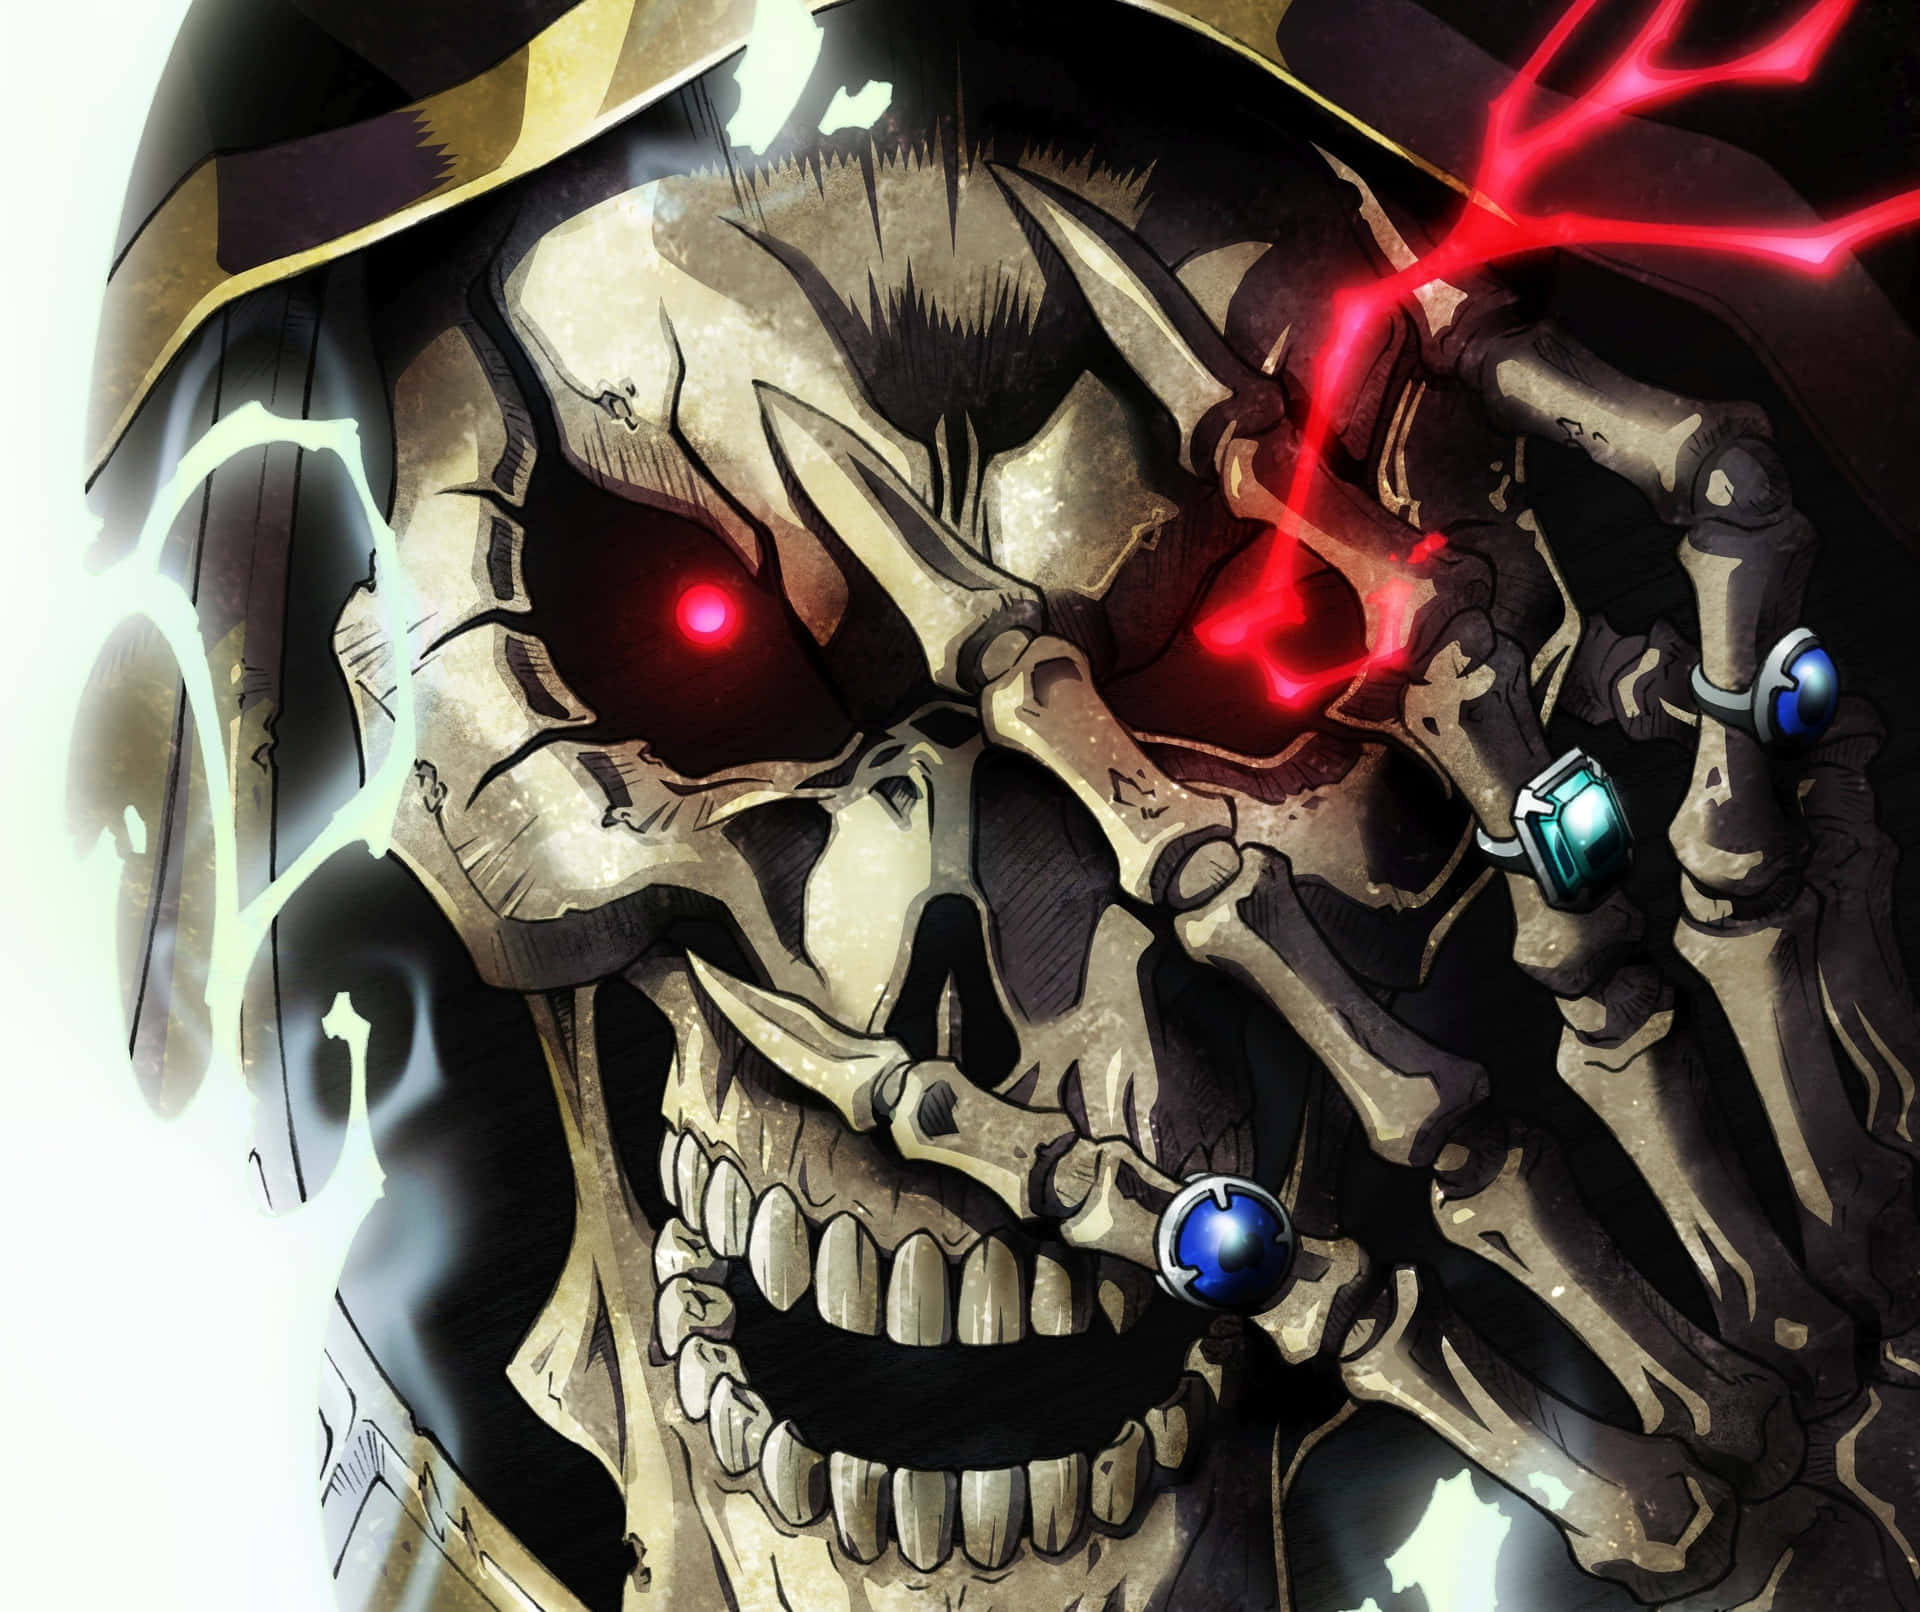 Anime series male overlord characters Ainz Ooal Gown wallpaper  1500x1000   901143  WallpaperUP